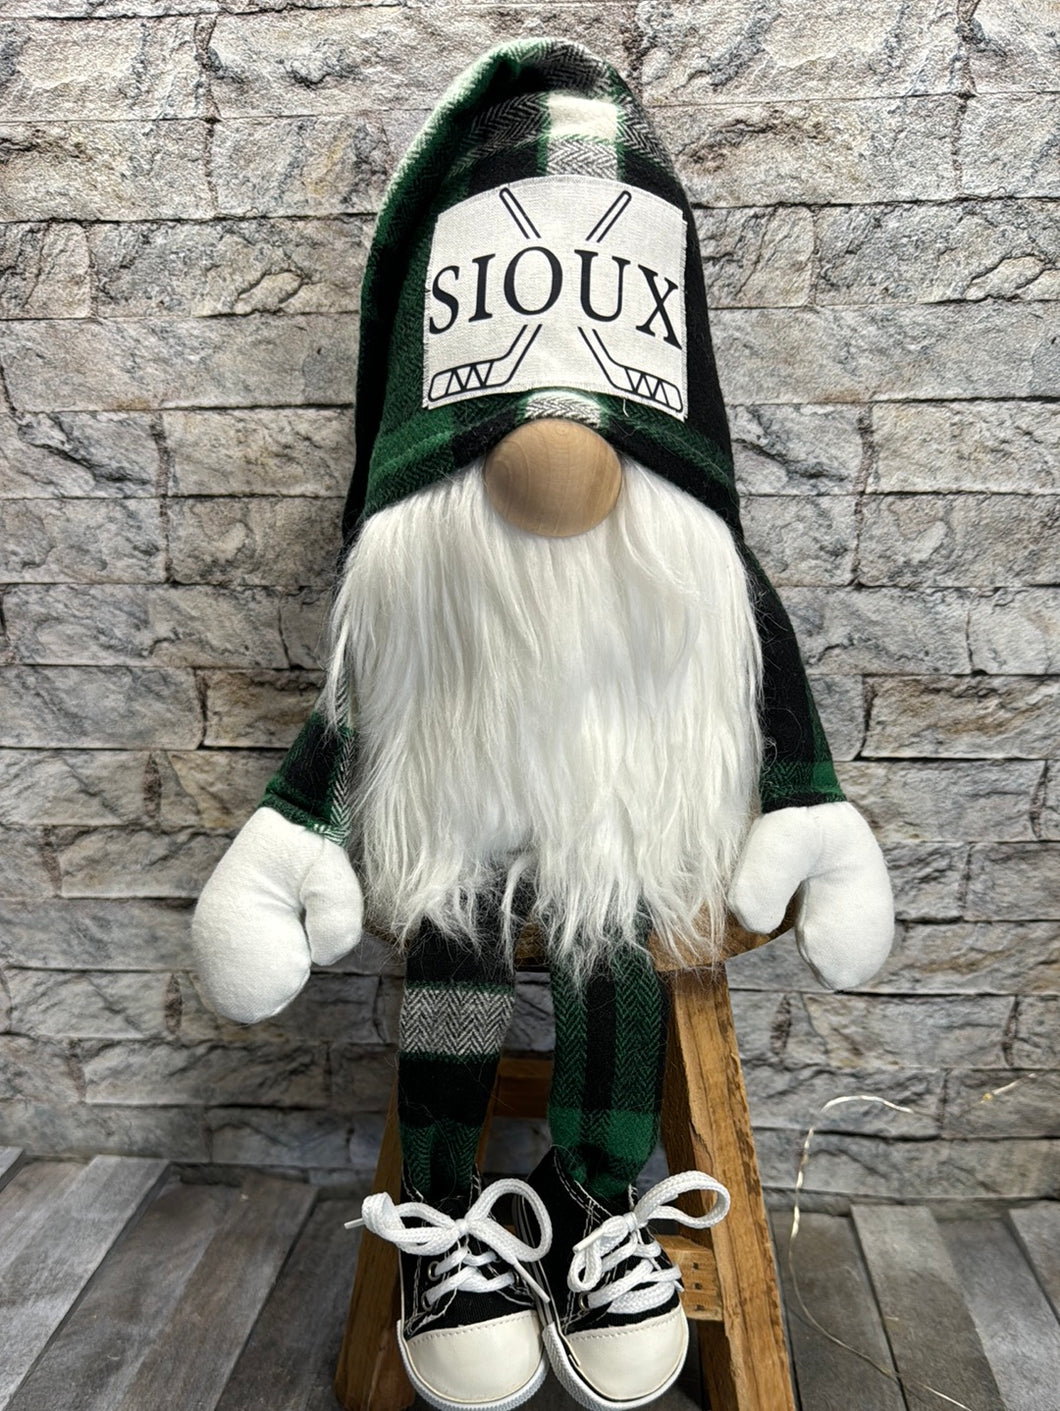 Sioux Gnome